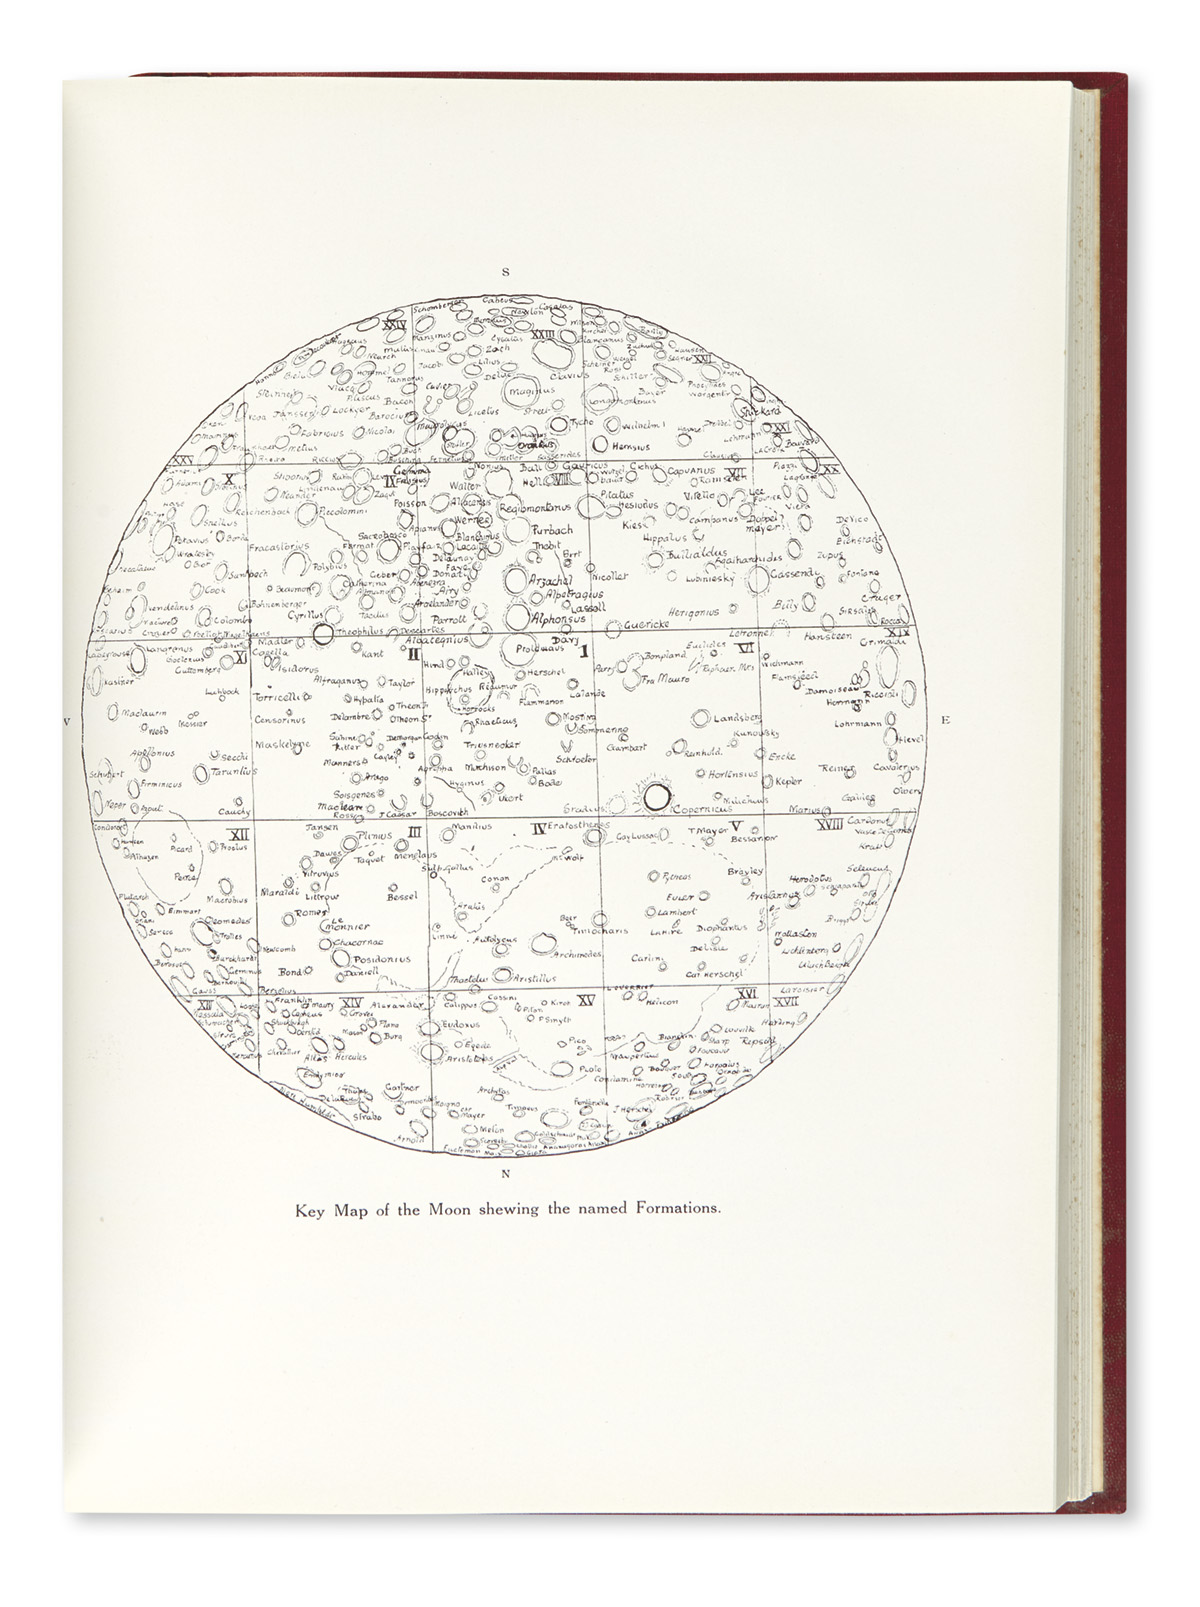 GOODACRE, WALTER. The Moon with a Description of its Surface Formations.  Fully illustrated by the Authors Revised Map.  1931